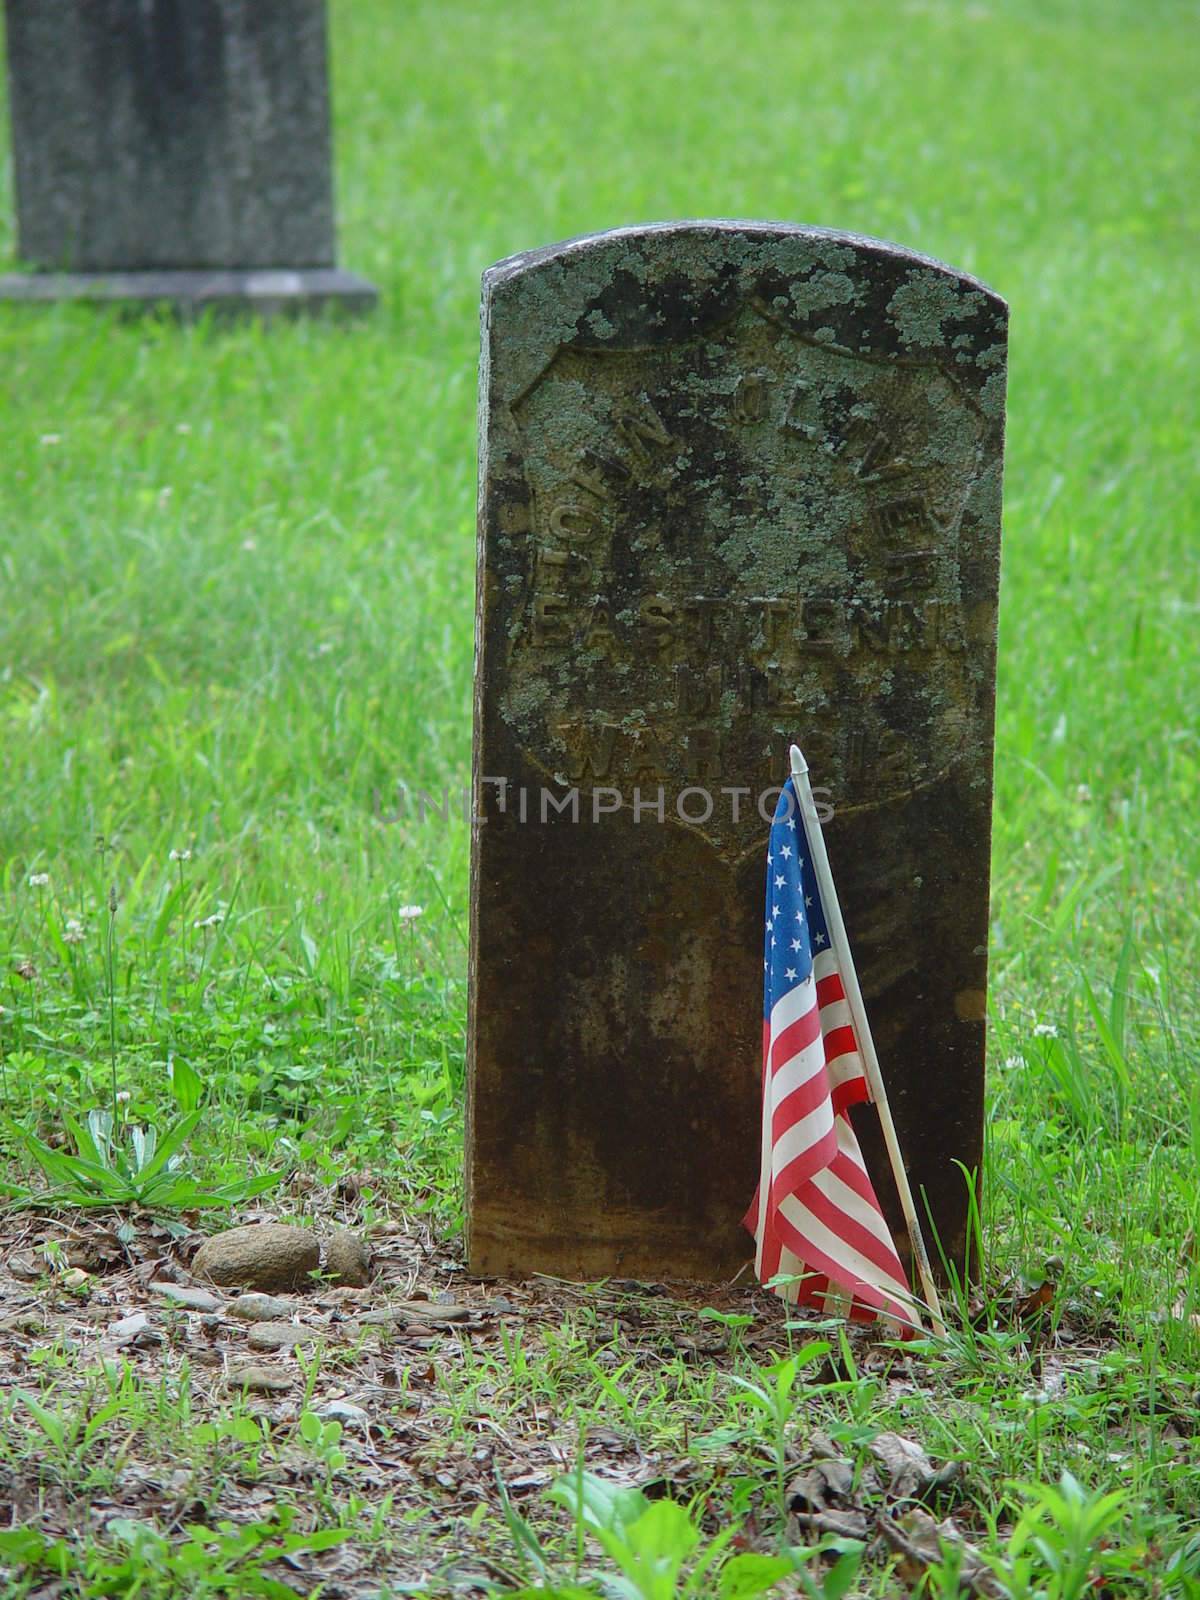 Deep in the Smoky Mountains, a hero from the War of 1812 rests.